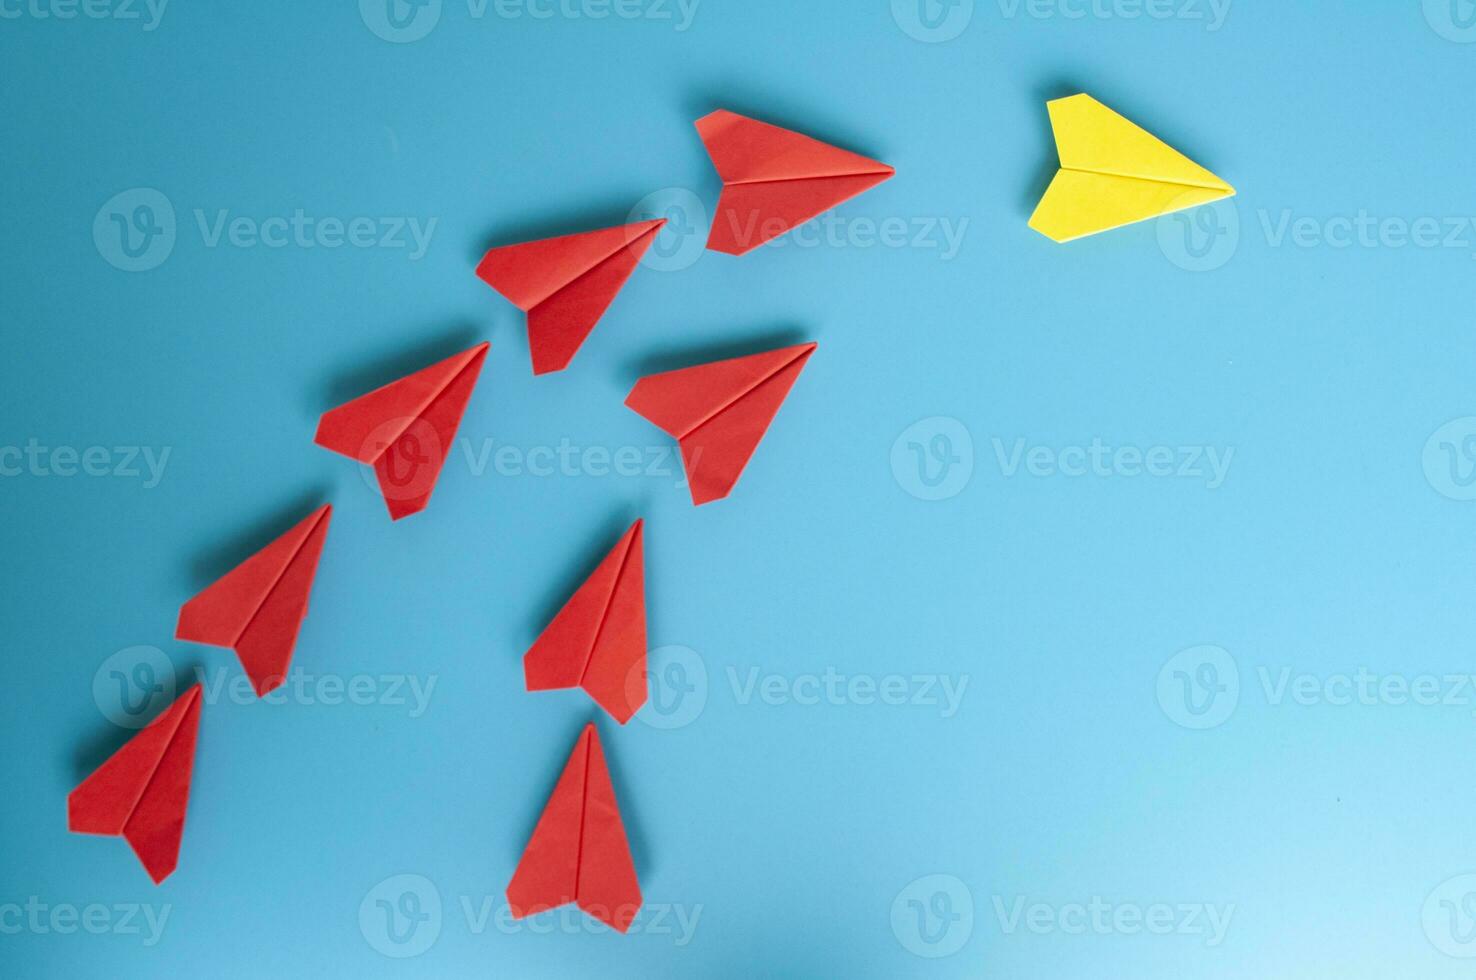 Top view of yellow paper airplane origami leading red paper airplanes. With copy space for text photo